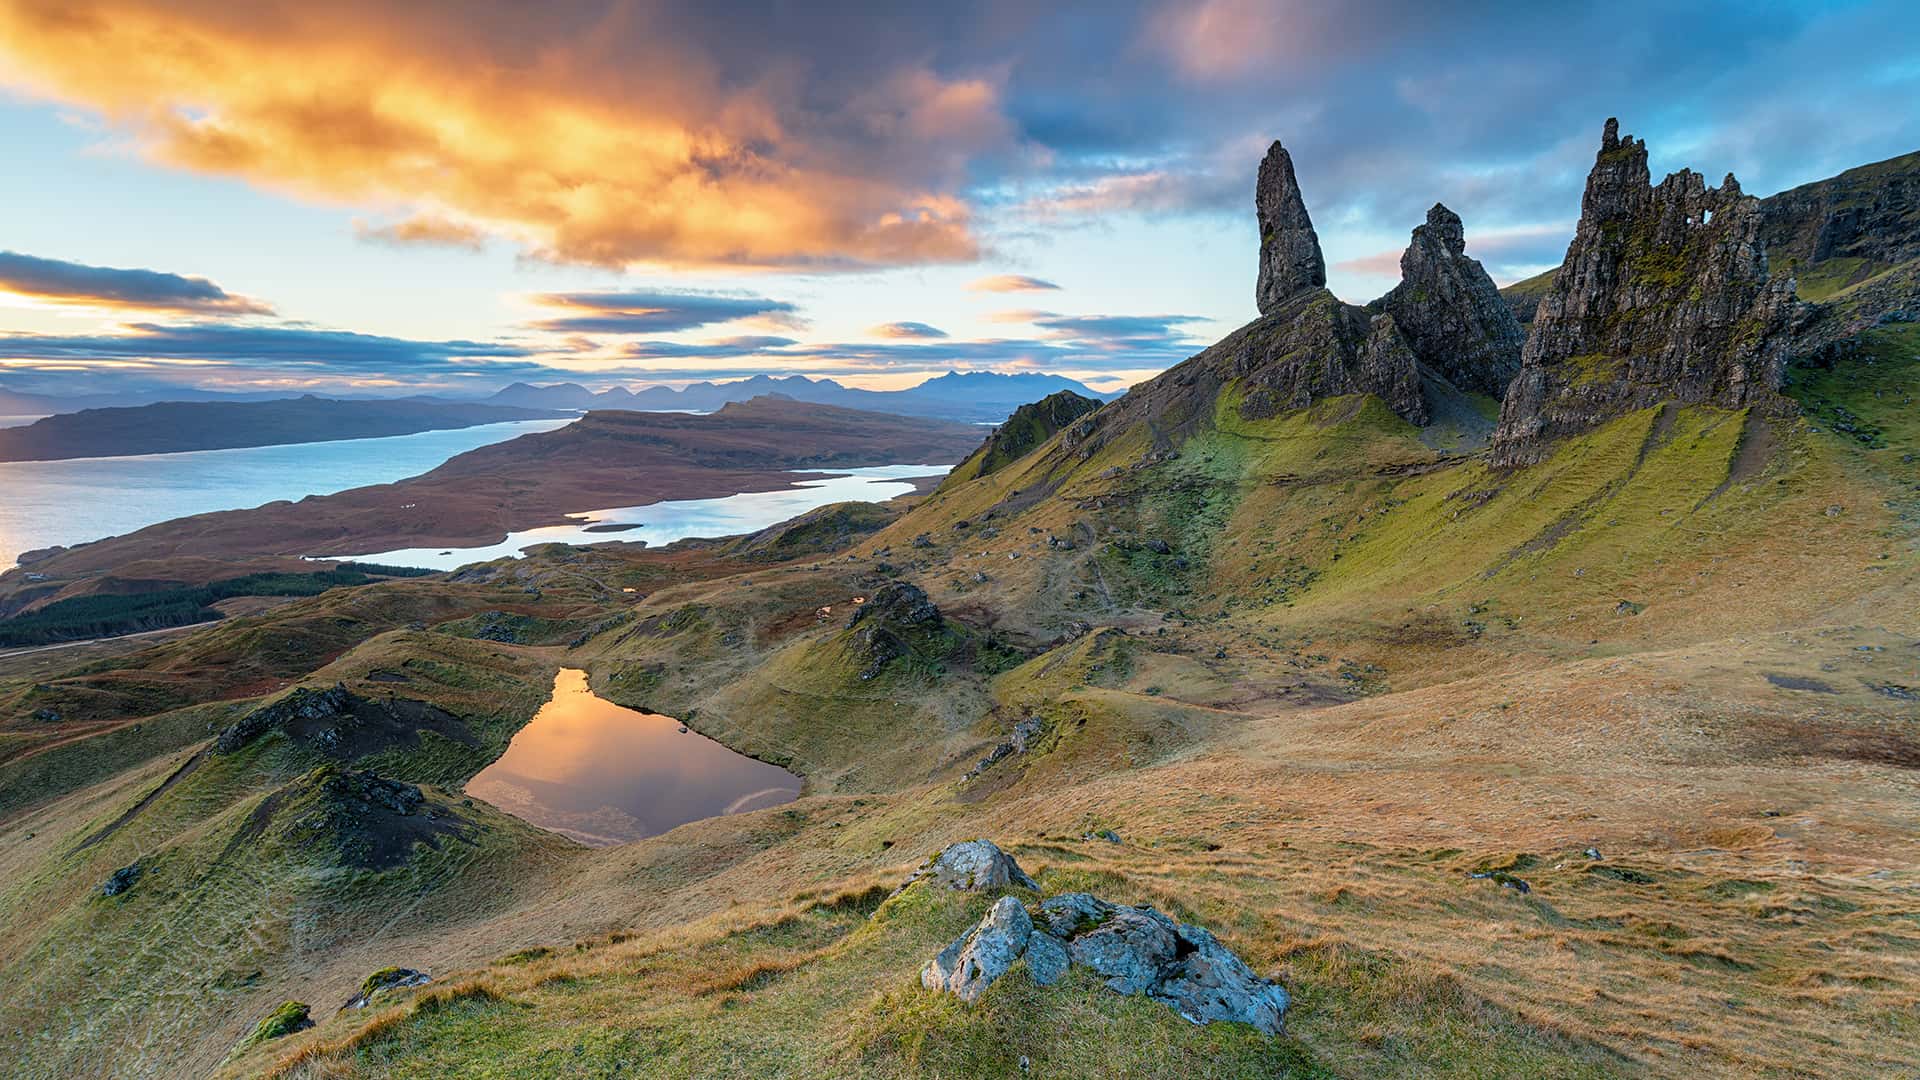 The Old Man of Storr on the Isle of Skye